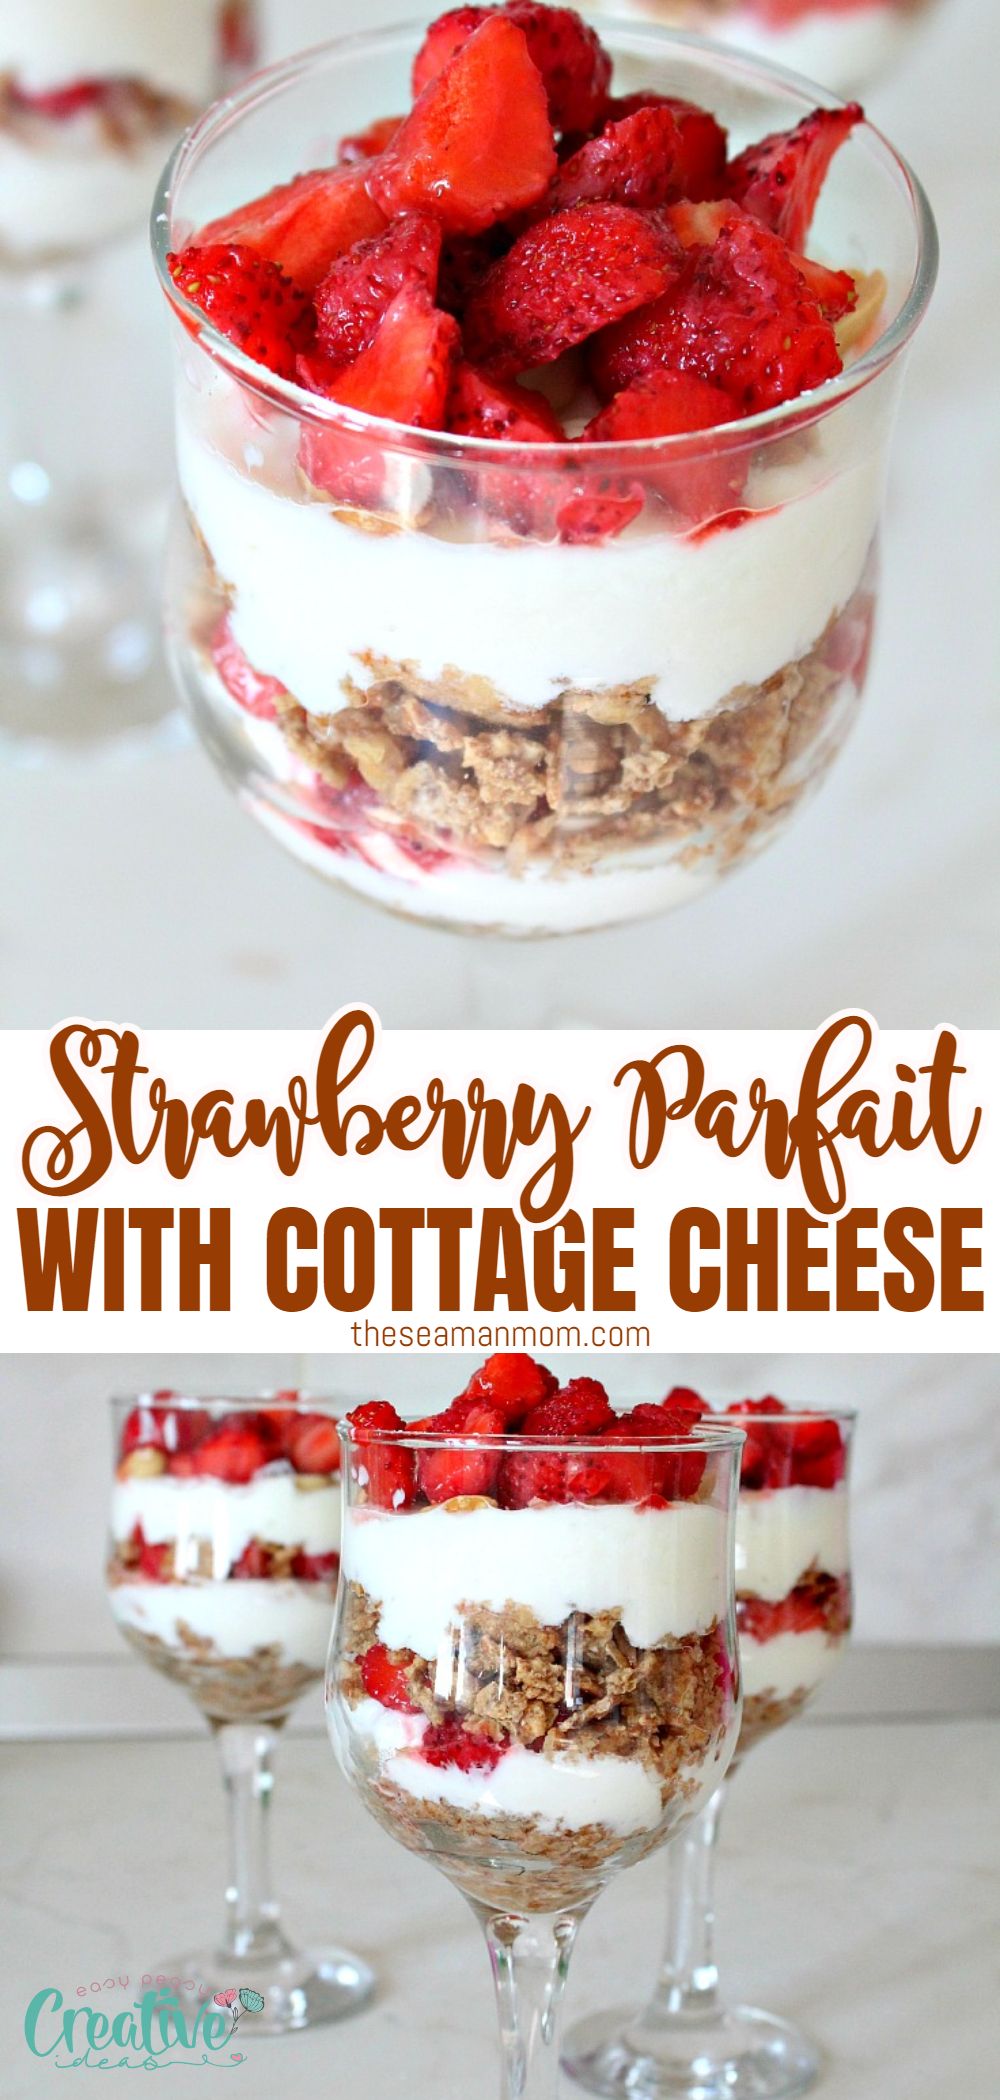 Who has time to cook a complicated breakfast every day? Not me. That's why I love this easy strawberry parfait! This recipe is the perfect way to enjoy your favorite fruit. The combination of flavors and textures will leave you feeling satisfied and happy. via @petroneagu